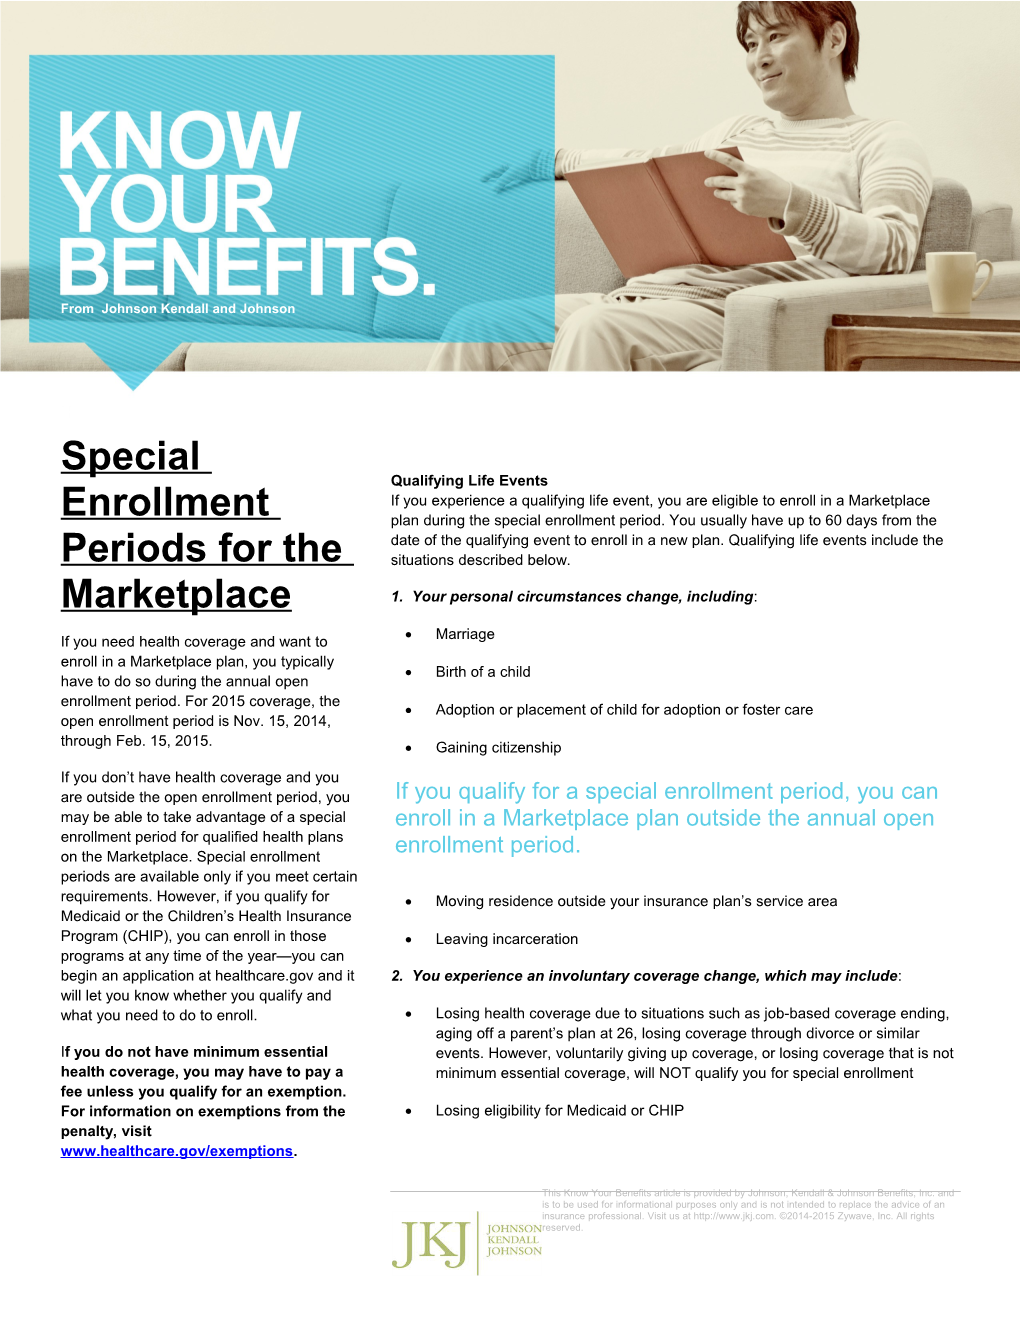 Special Enrollment Periods for the Marketplace